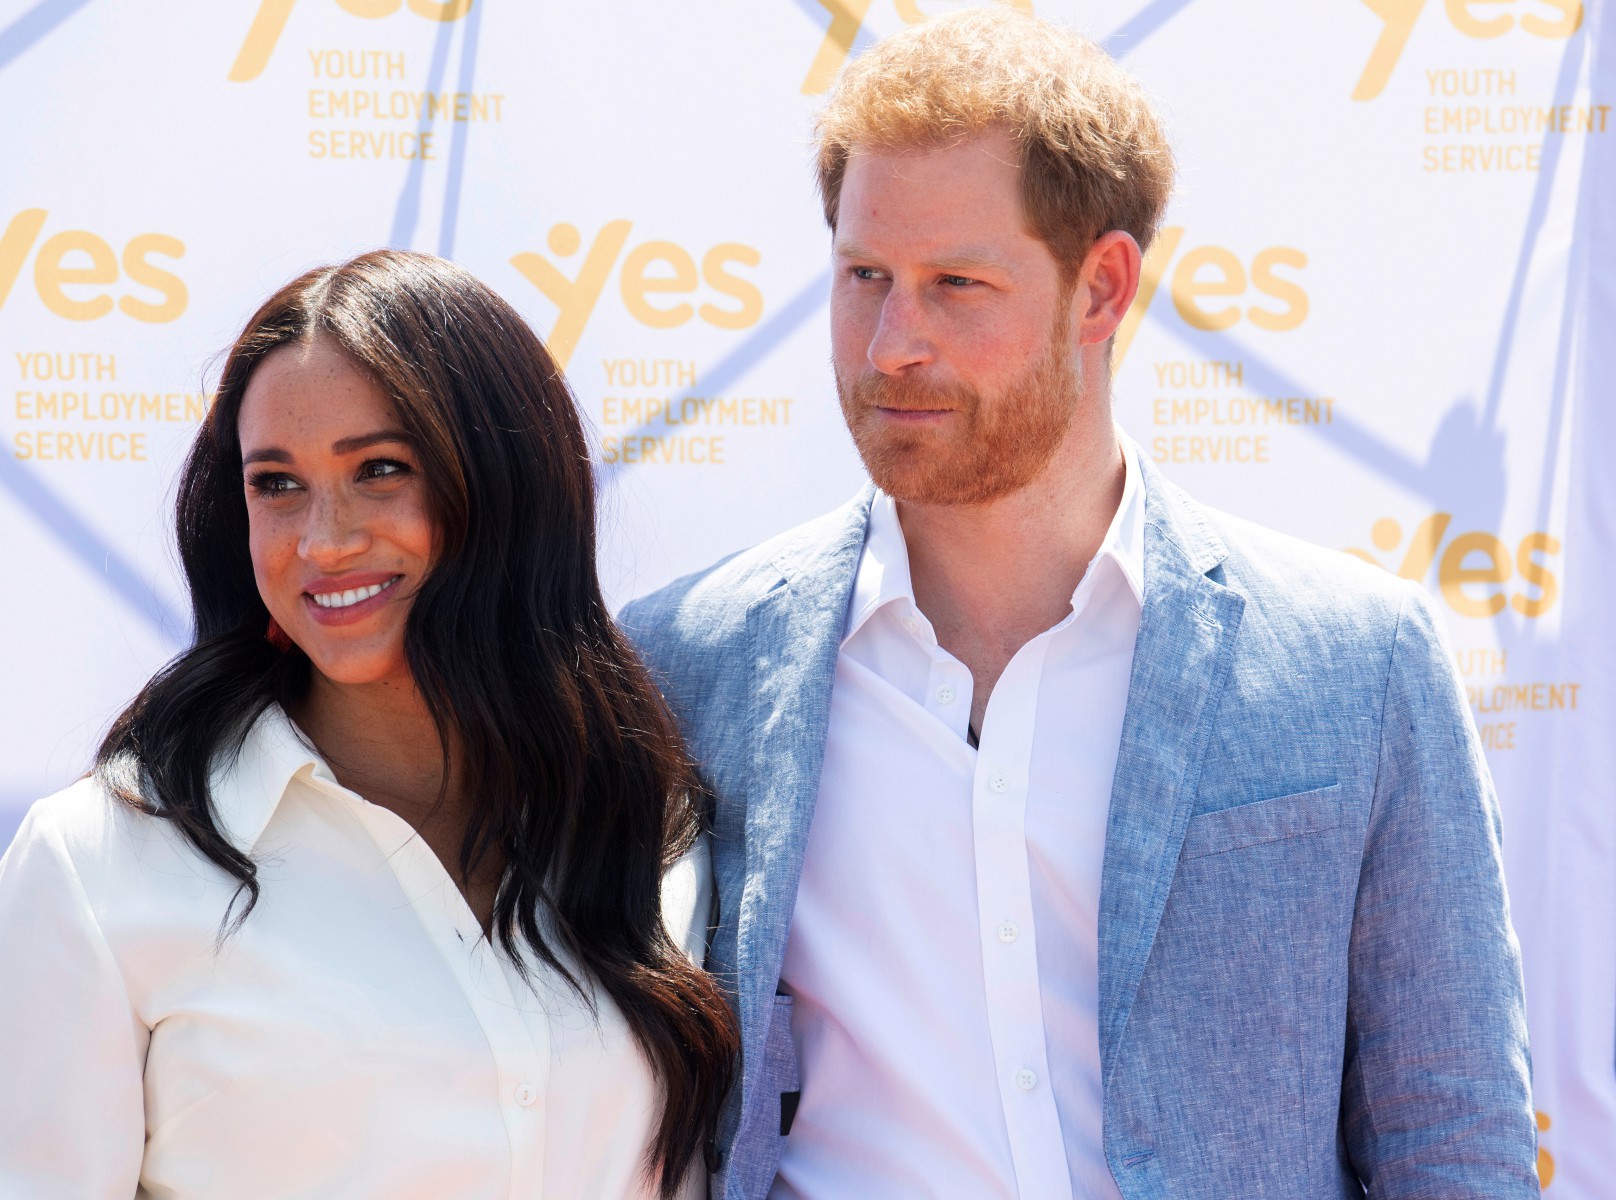 Meghan Markle and Prince Harry's Instagram page has hit 10million followers